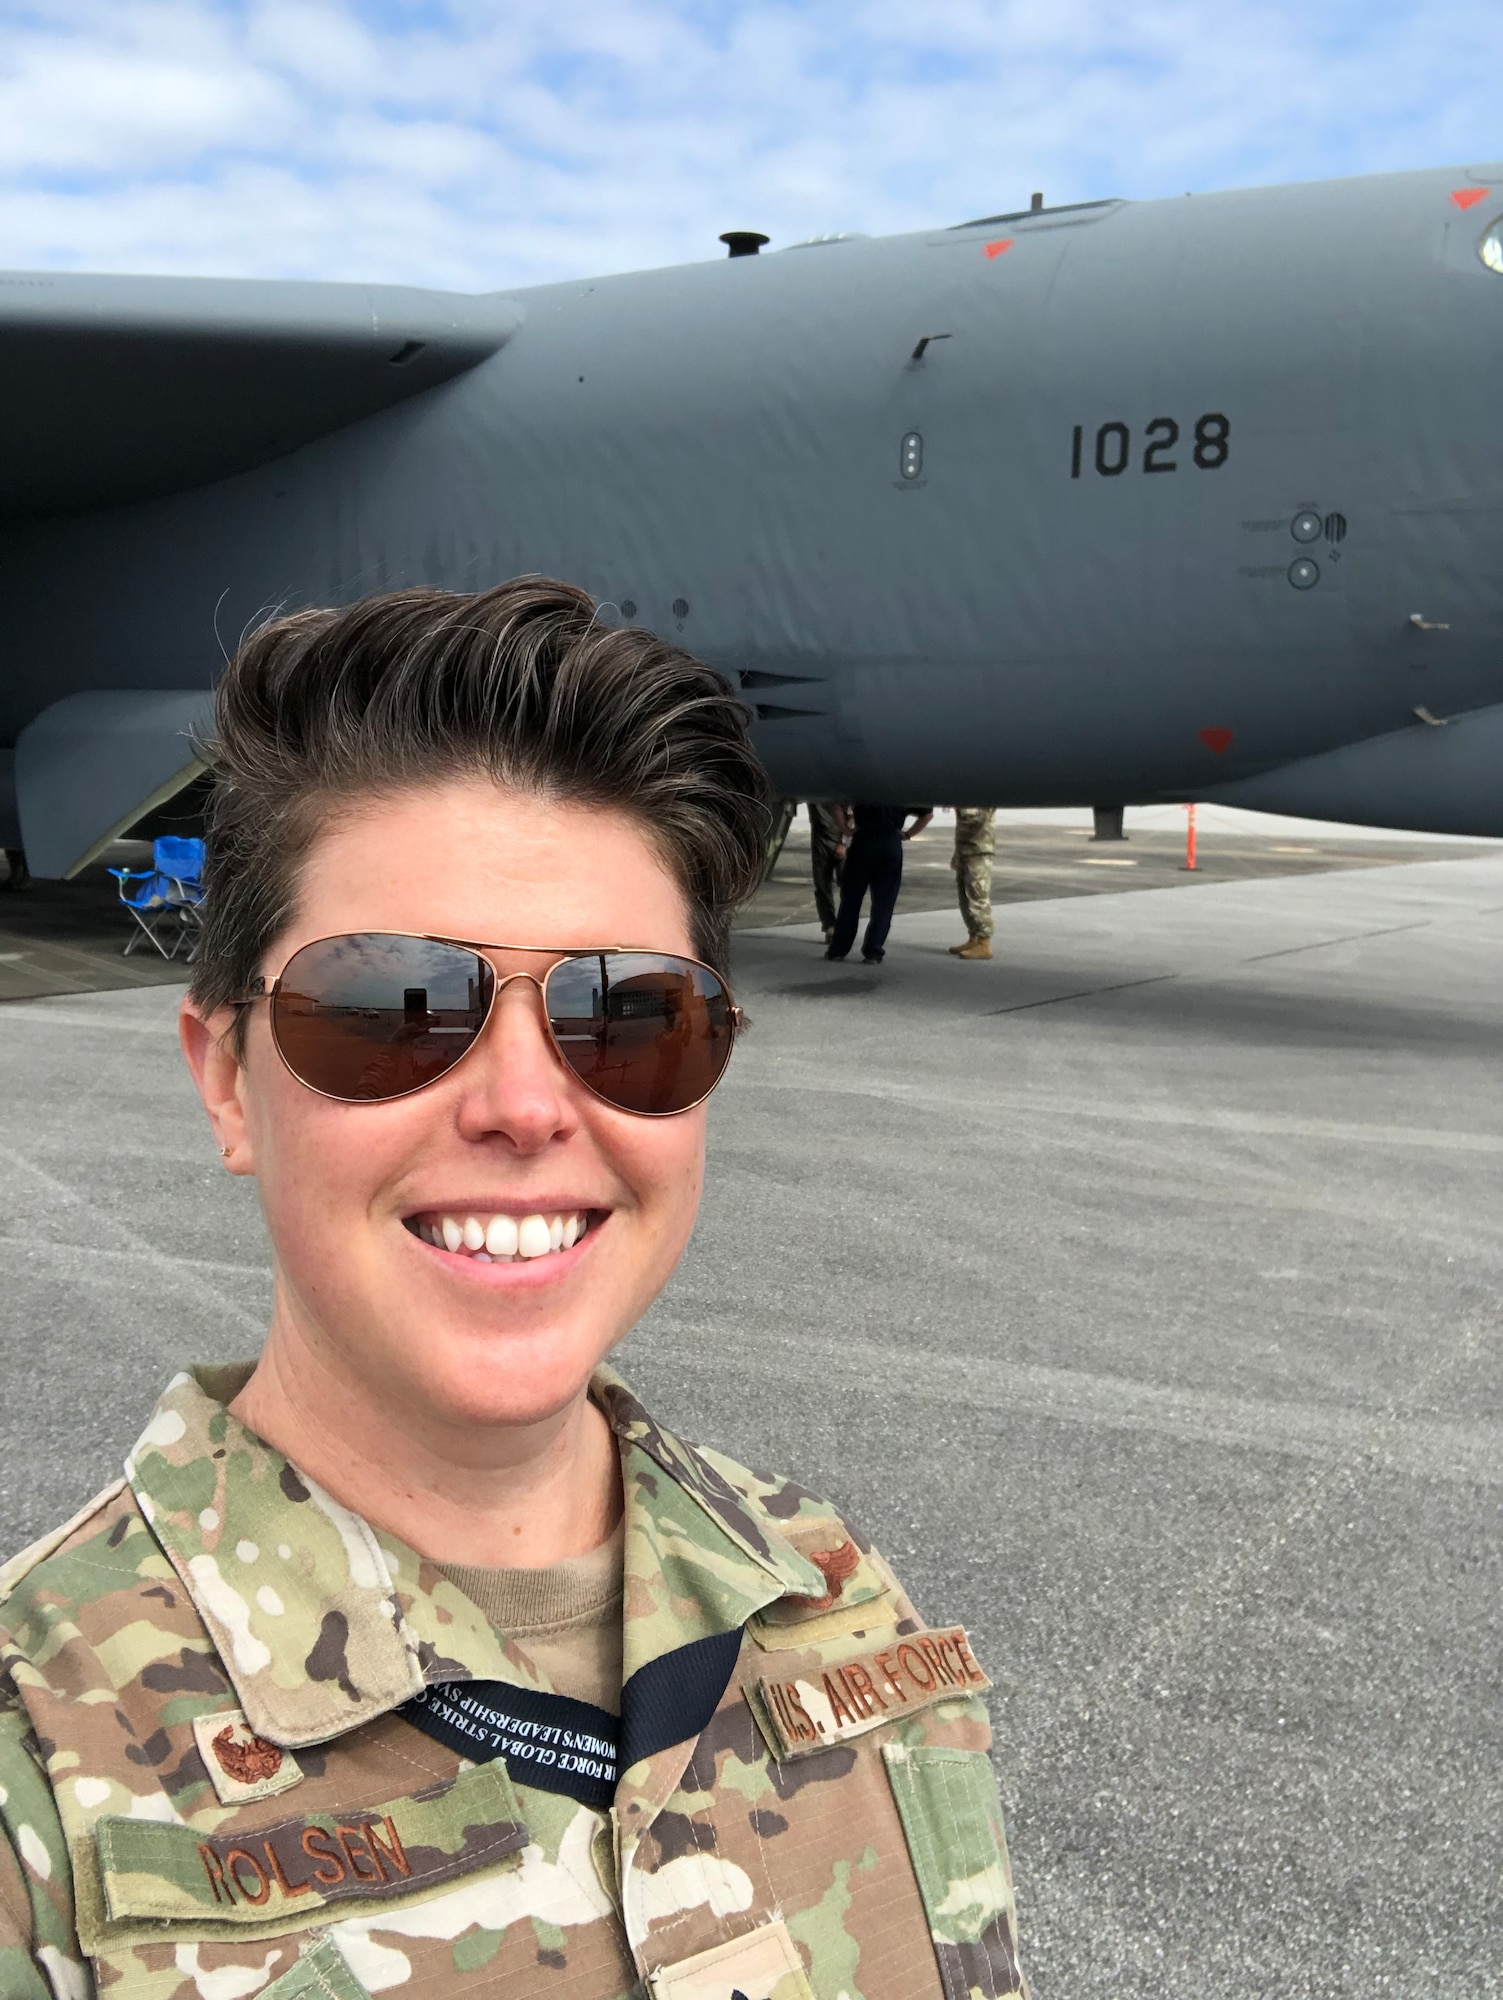 U.S. Air Force Lt. Col. Kera A. Rolsen, 950th Spectrum Warfare Group activation project officer, poses for a photo. (Courtesy Photo)